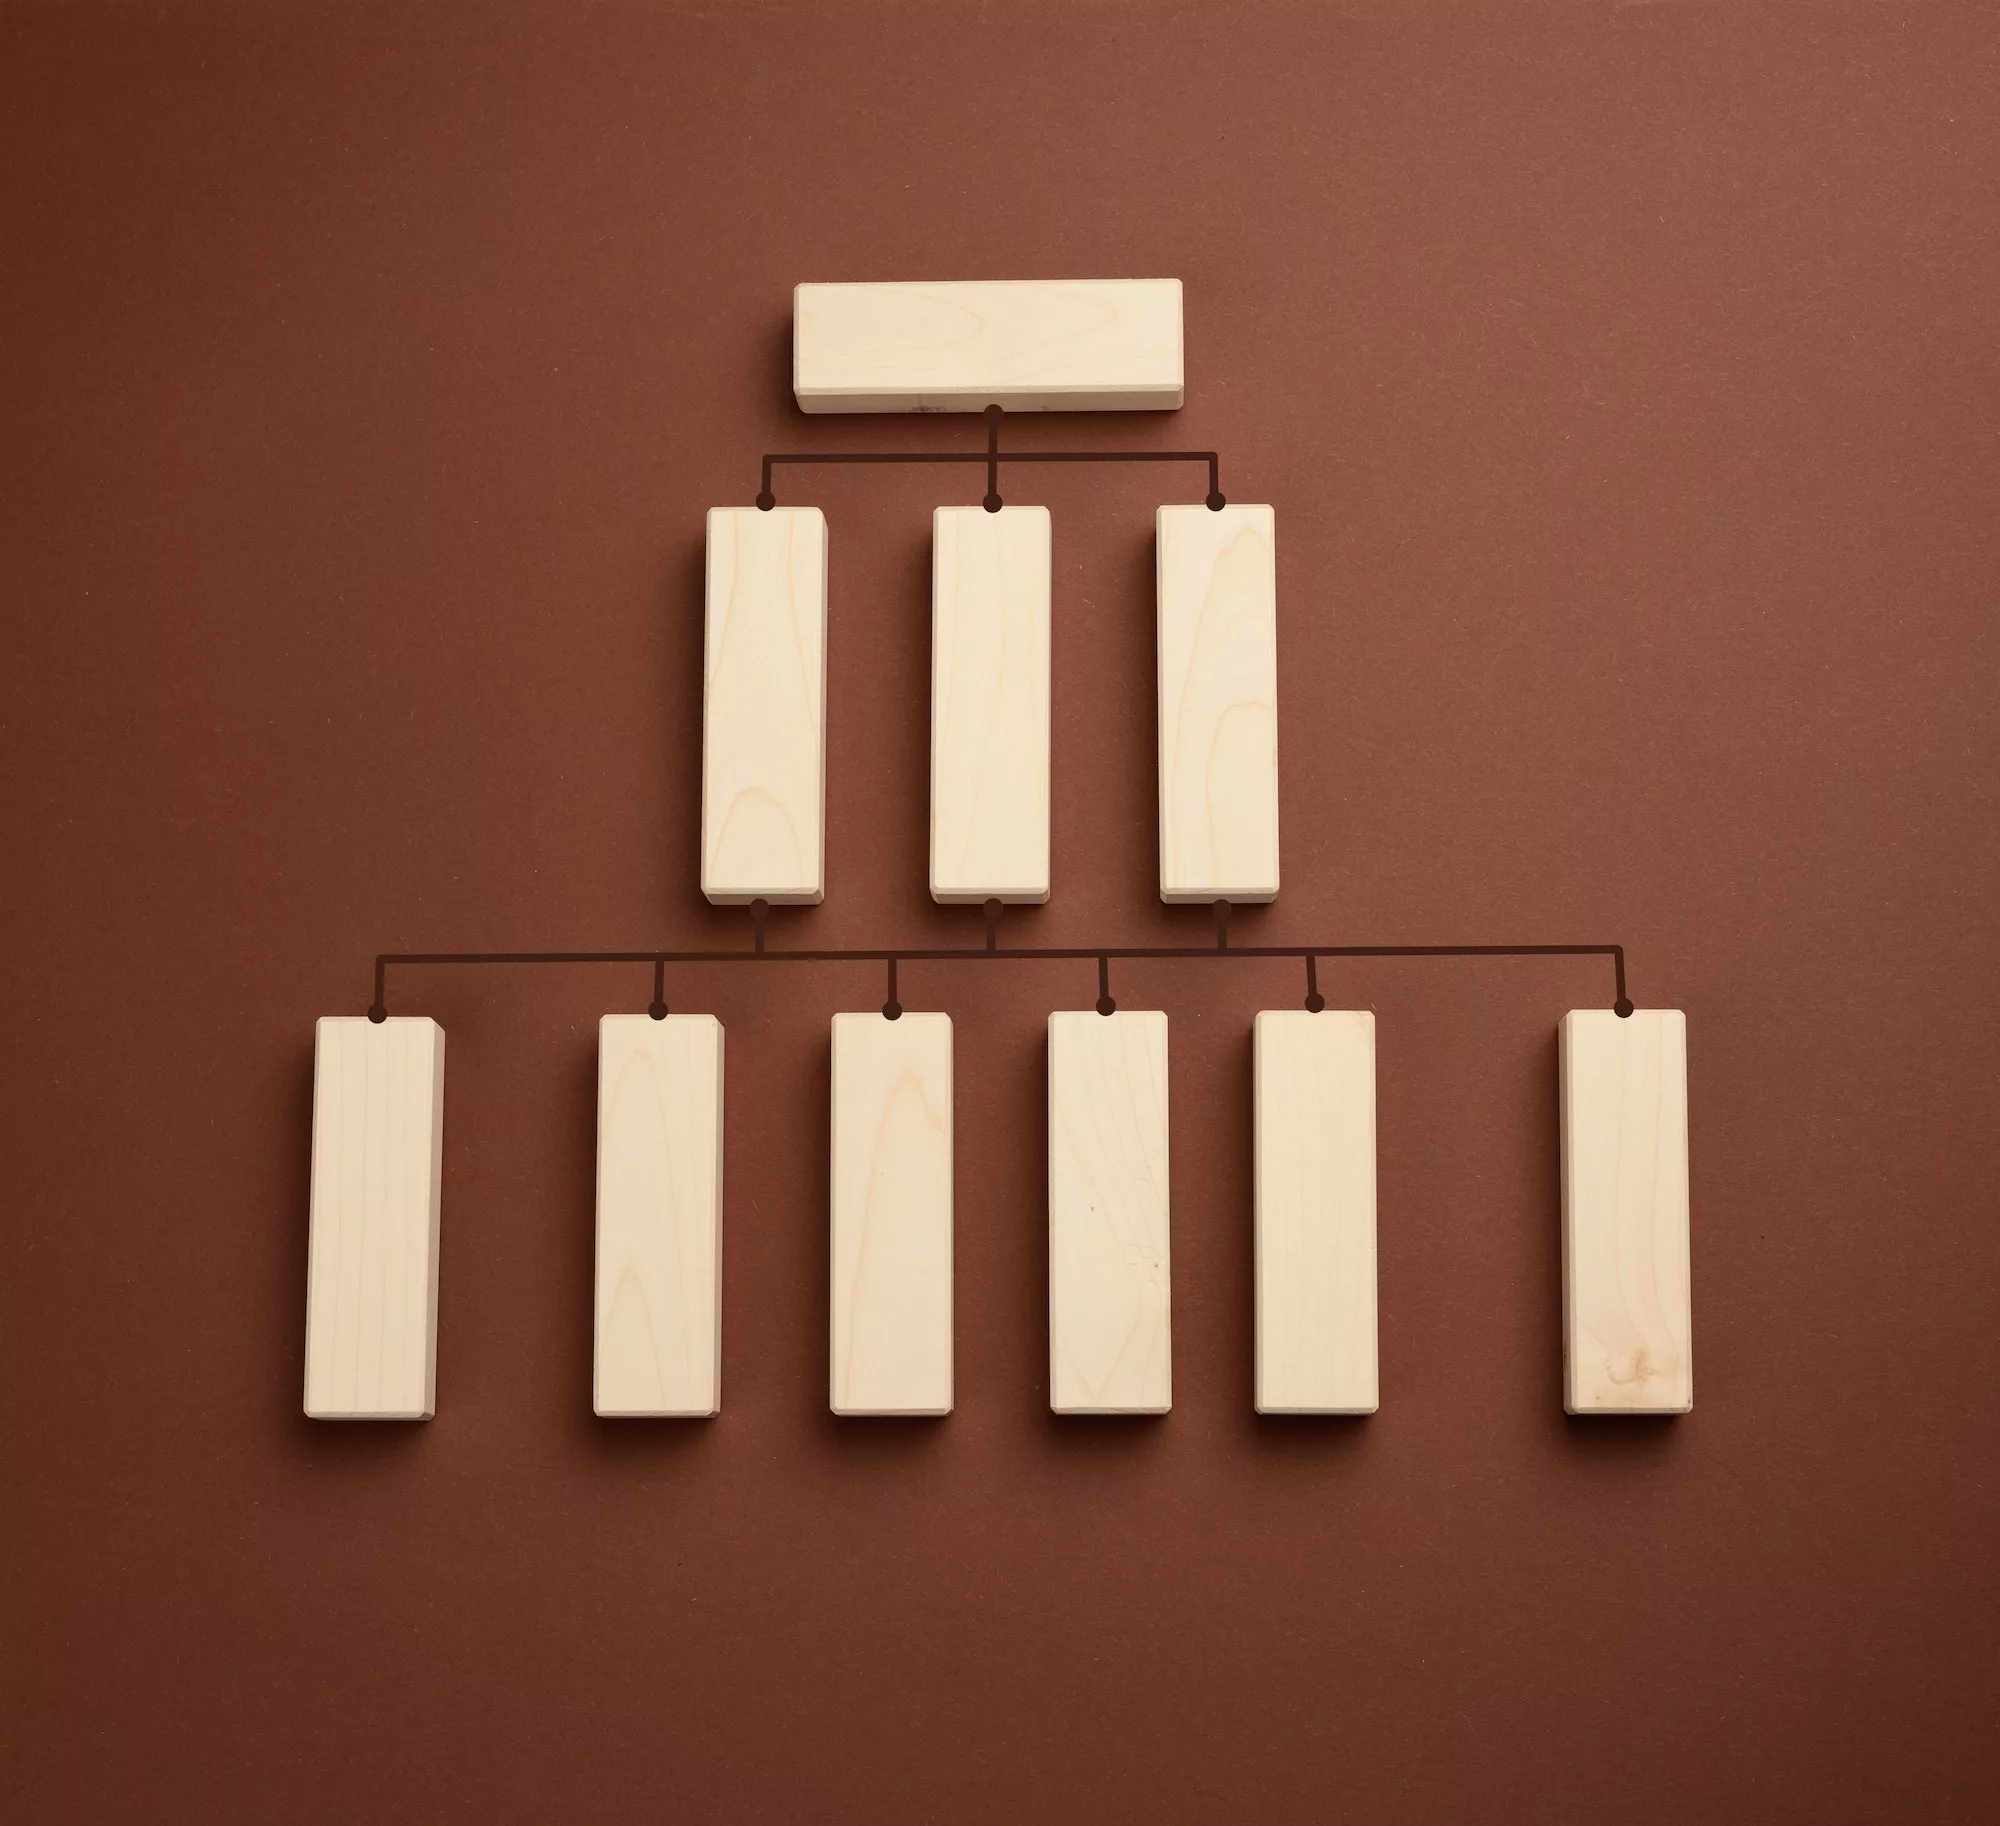 Blocks with figures on a brown background, hierarchical organizational structure of management